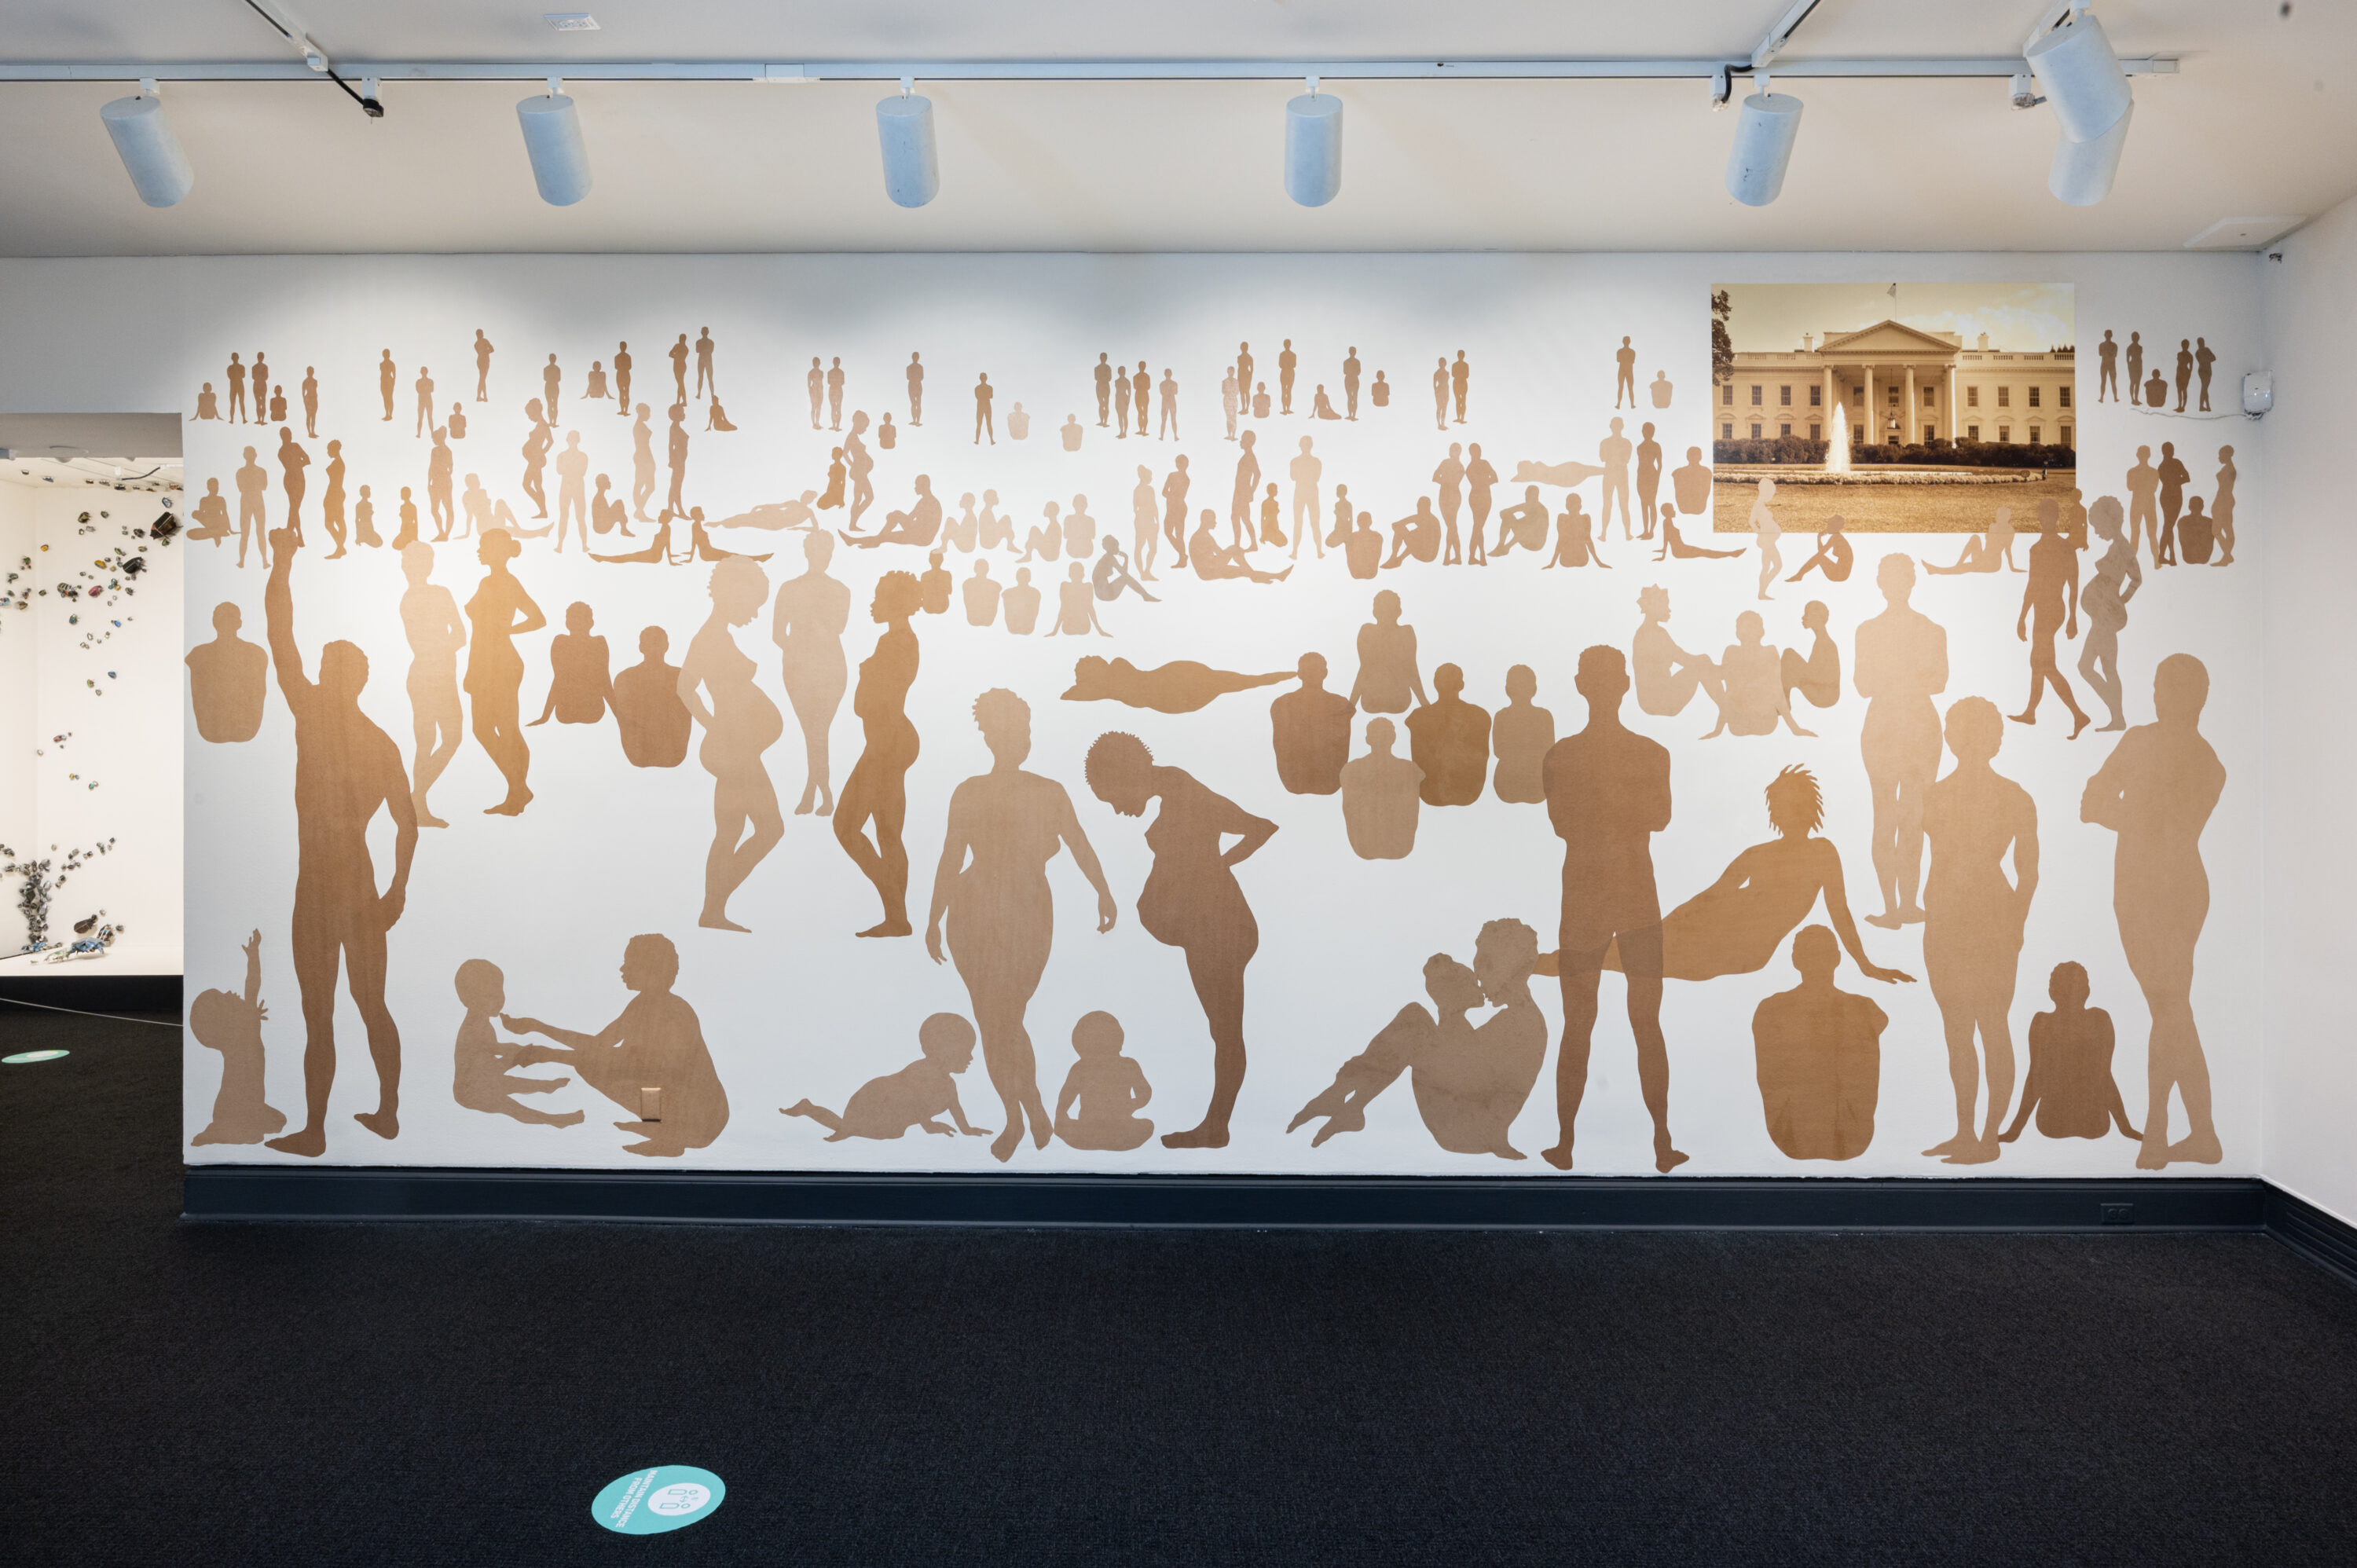 Over 100 silhouetted figures of varying ages, shapes, poses, and skin tones on a large white wall. In the top-right corner is a rectangular picture of the White House.